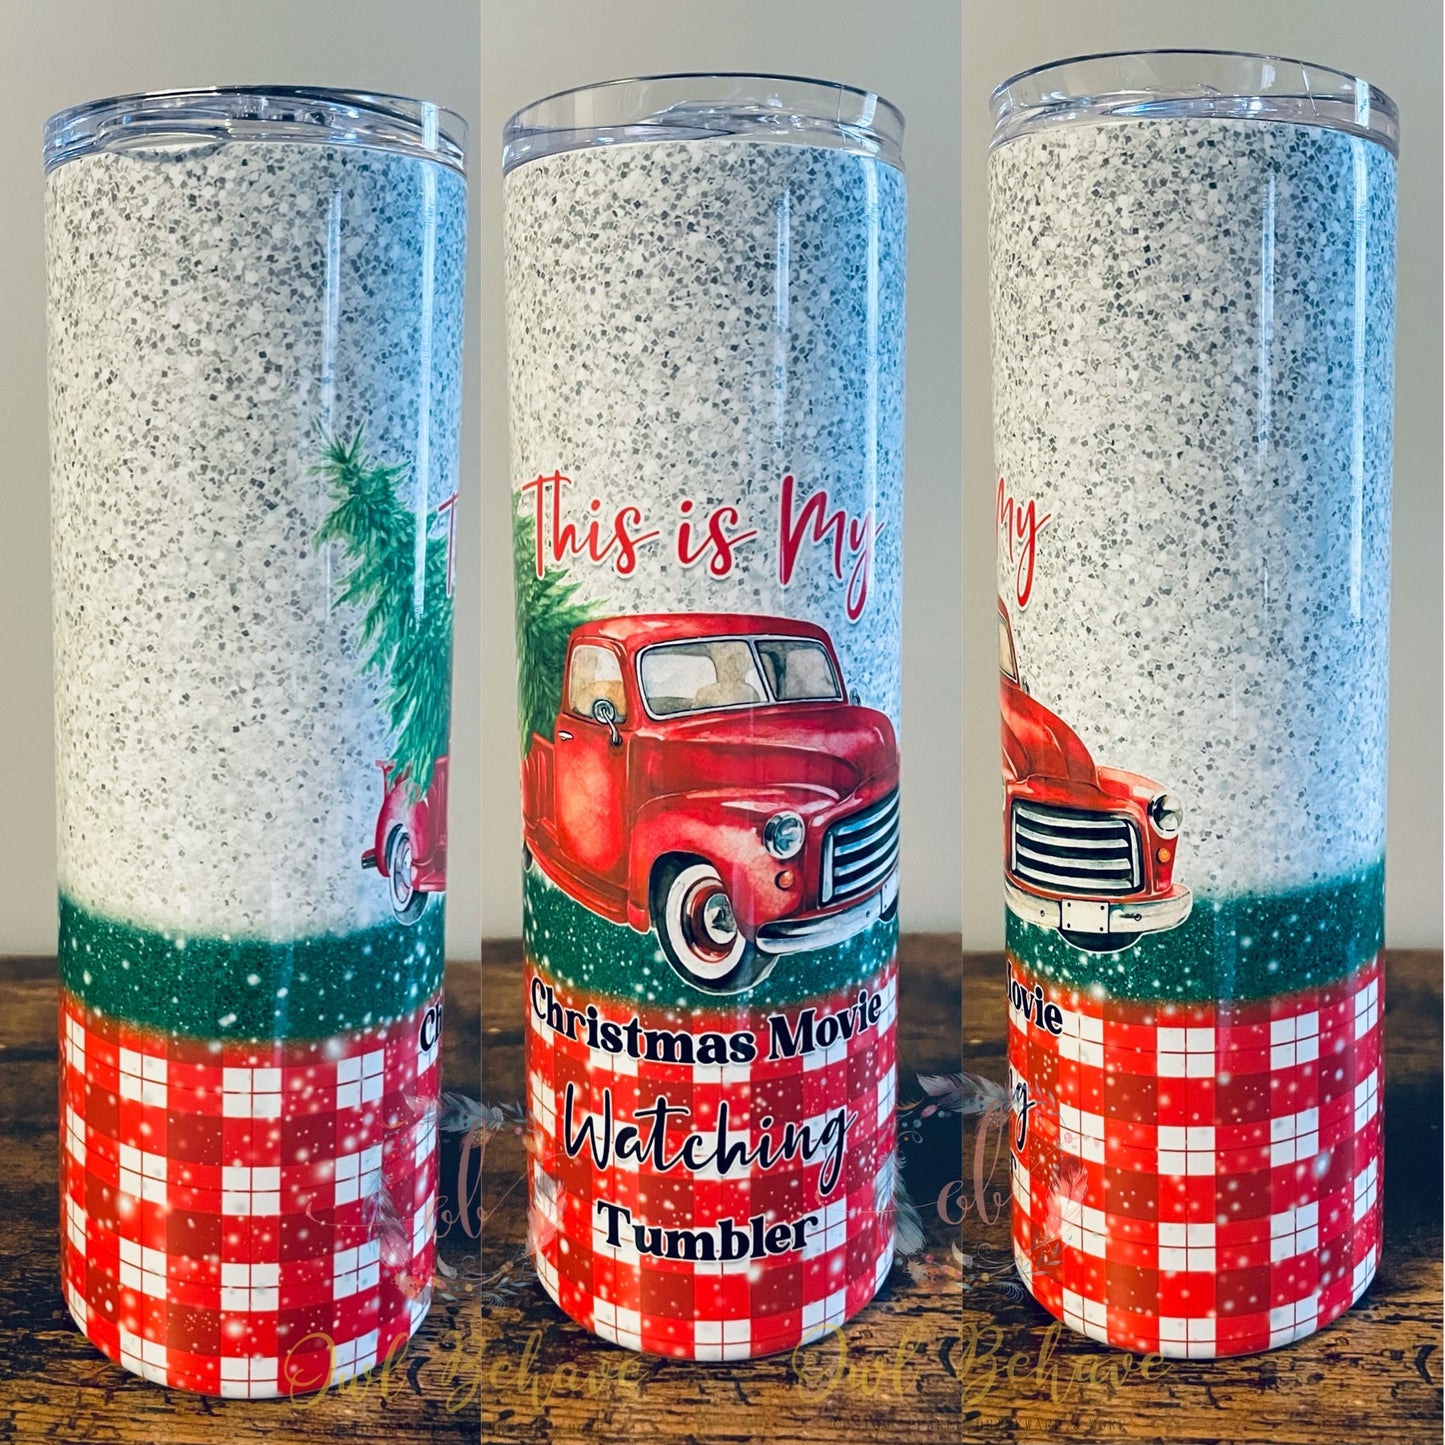 This Is My Christmas Movie Watching Tumbler Sublimation Tumbler